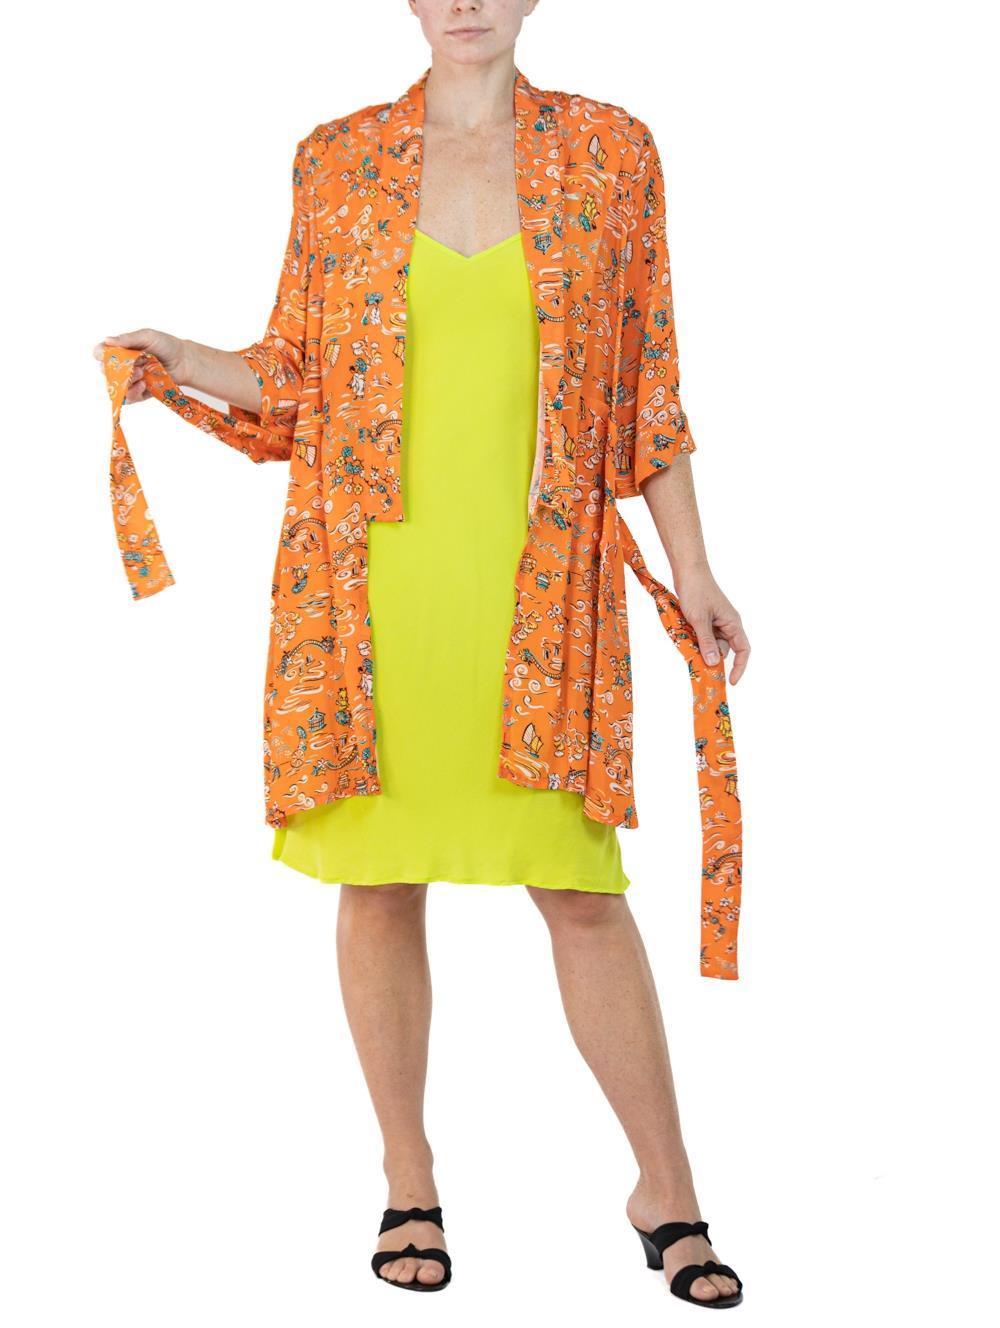 Morphew Collection Orange & Yellow Cherry Blossom Novelty Print Cold Rayon Bias For Sale 3